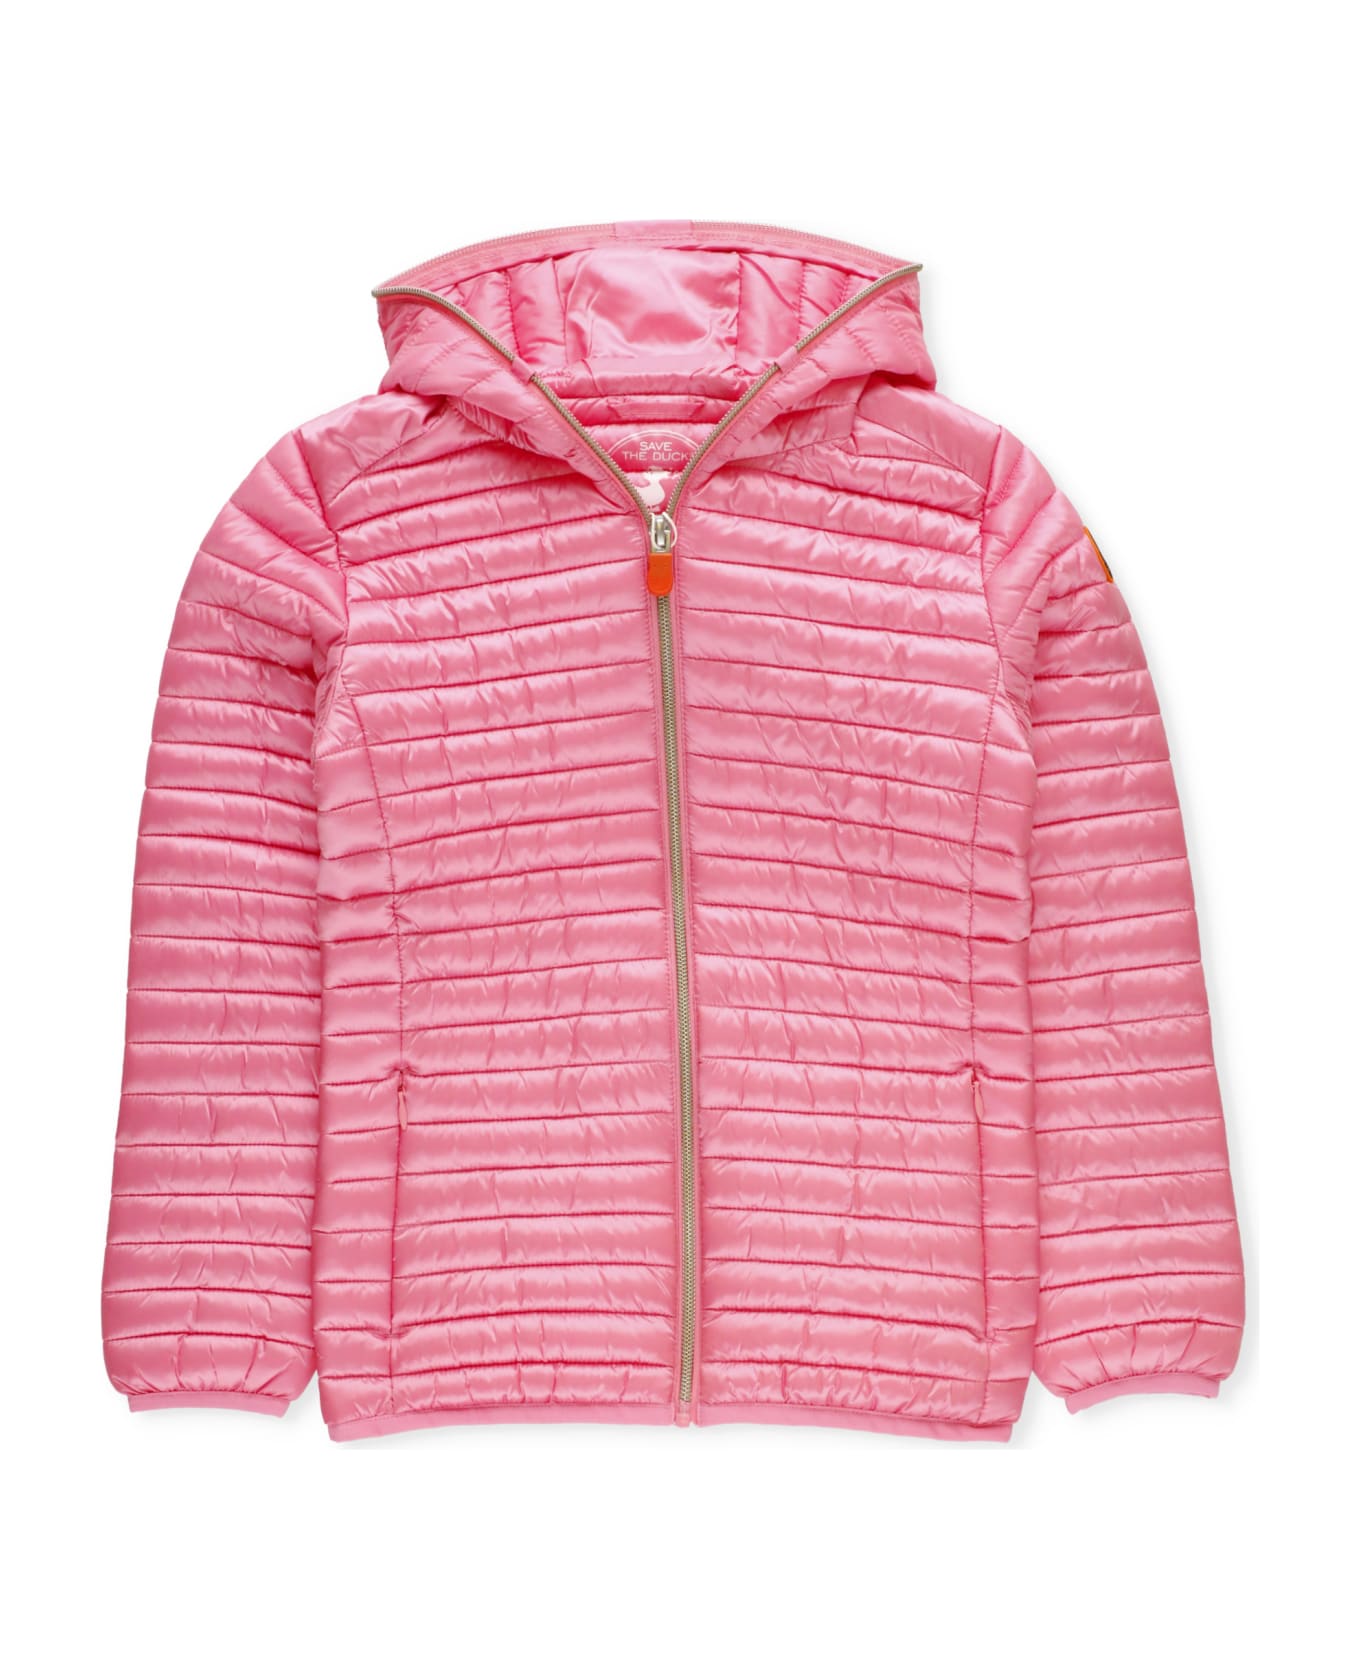 Save the Duck Rosy Jacket - Pink